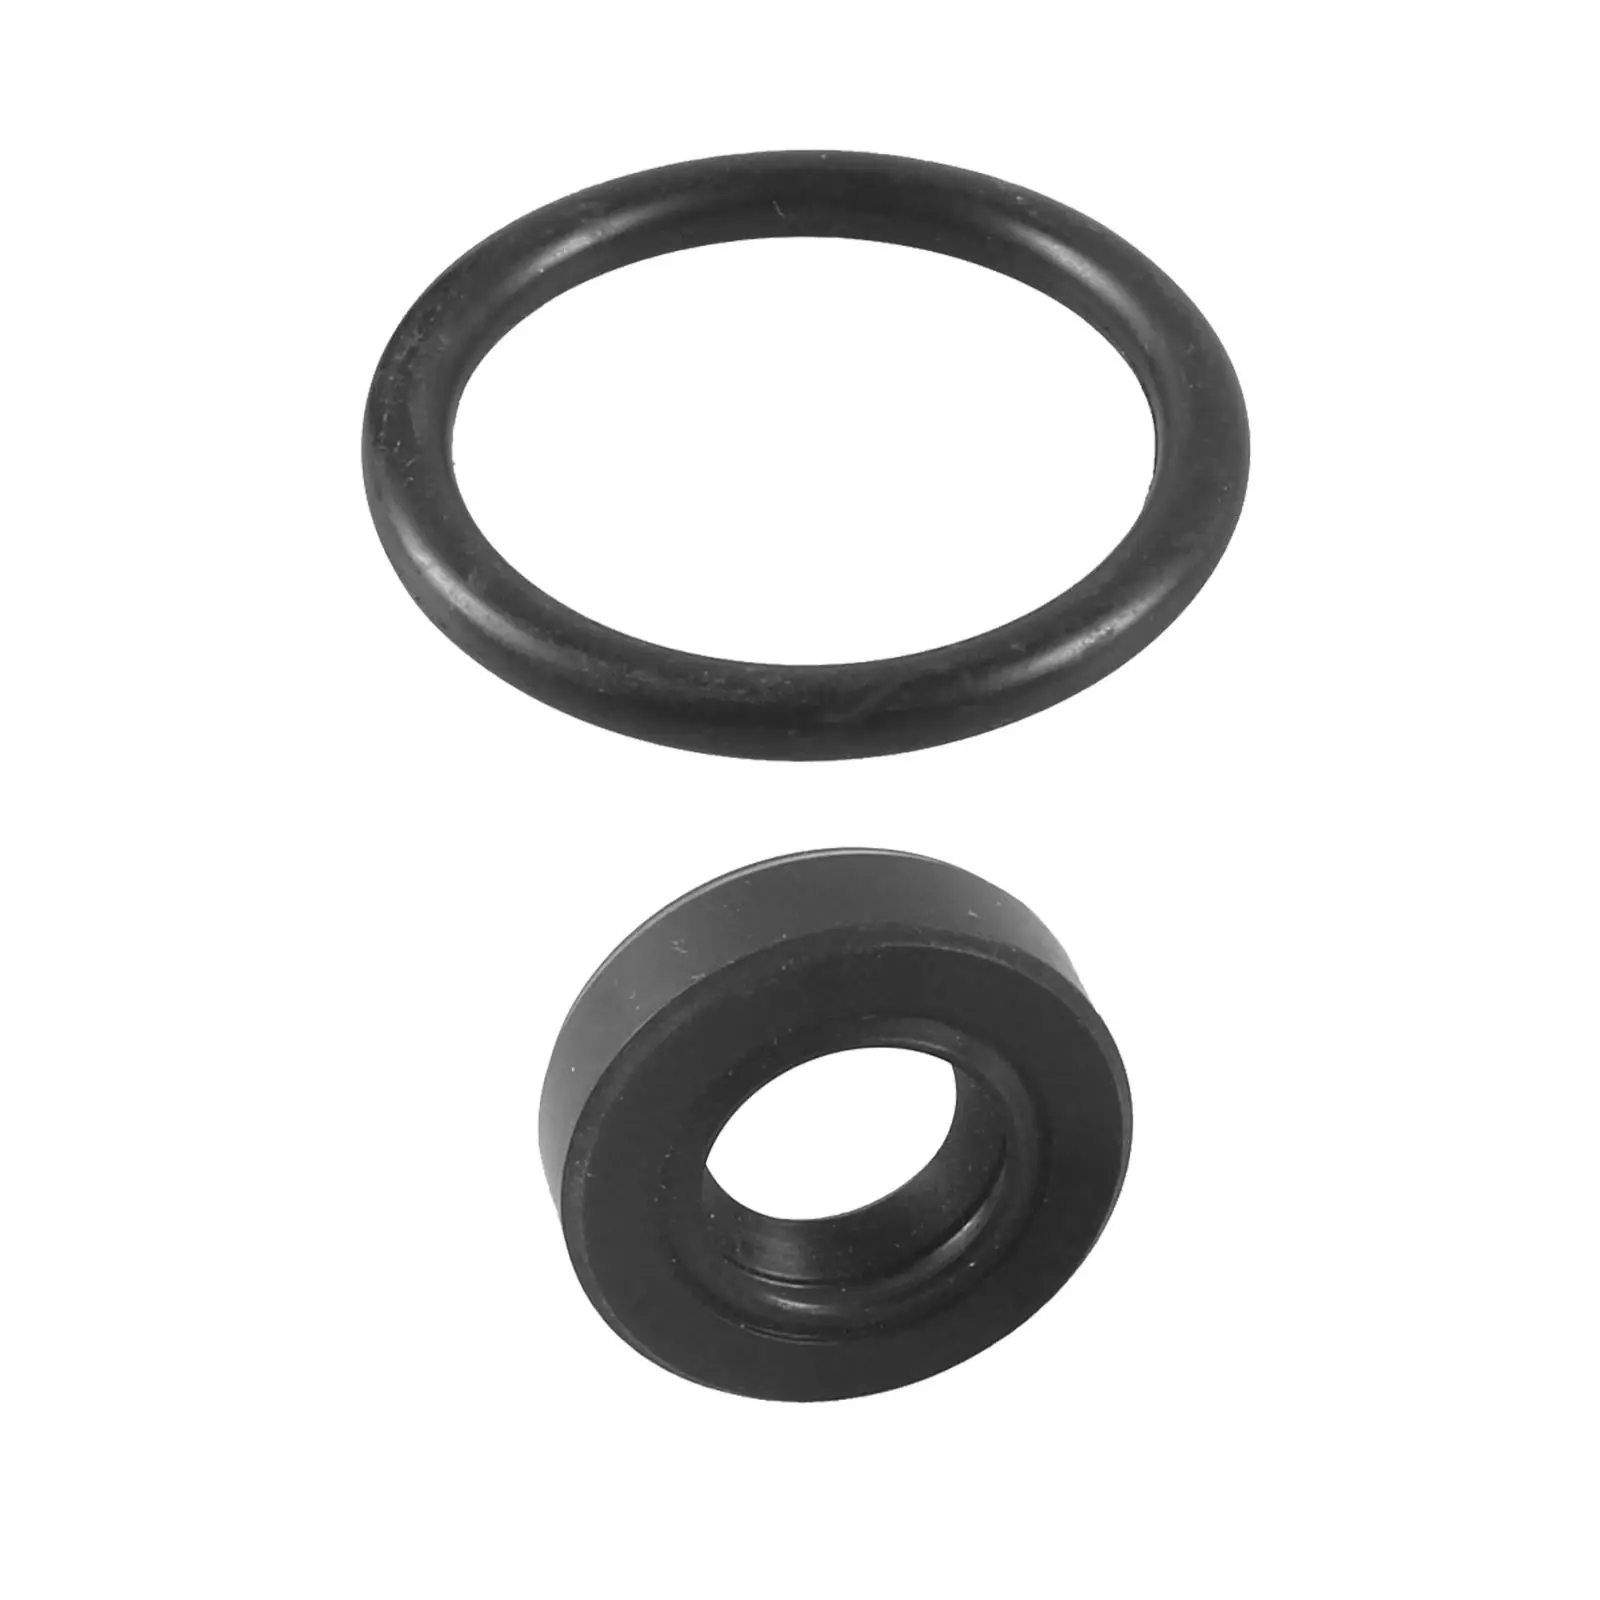 BH3888E0 Oil Leaks ring Replacement Oil Distributor Seal Replace BH3888-E0 for Honda Cr-2001